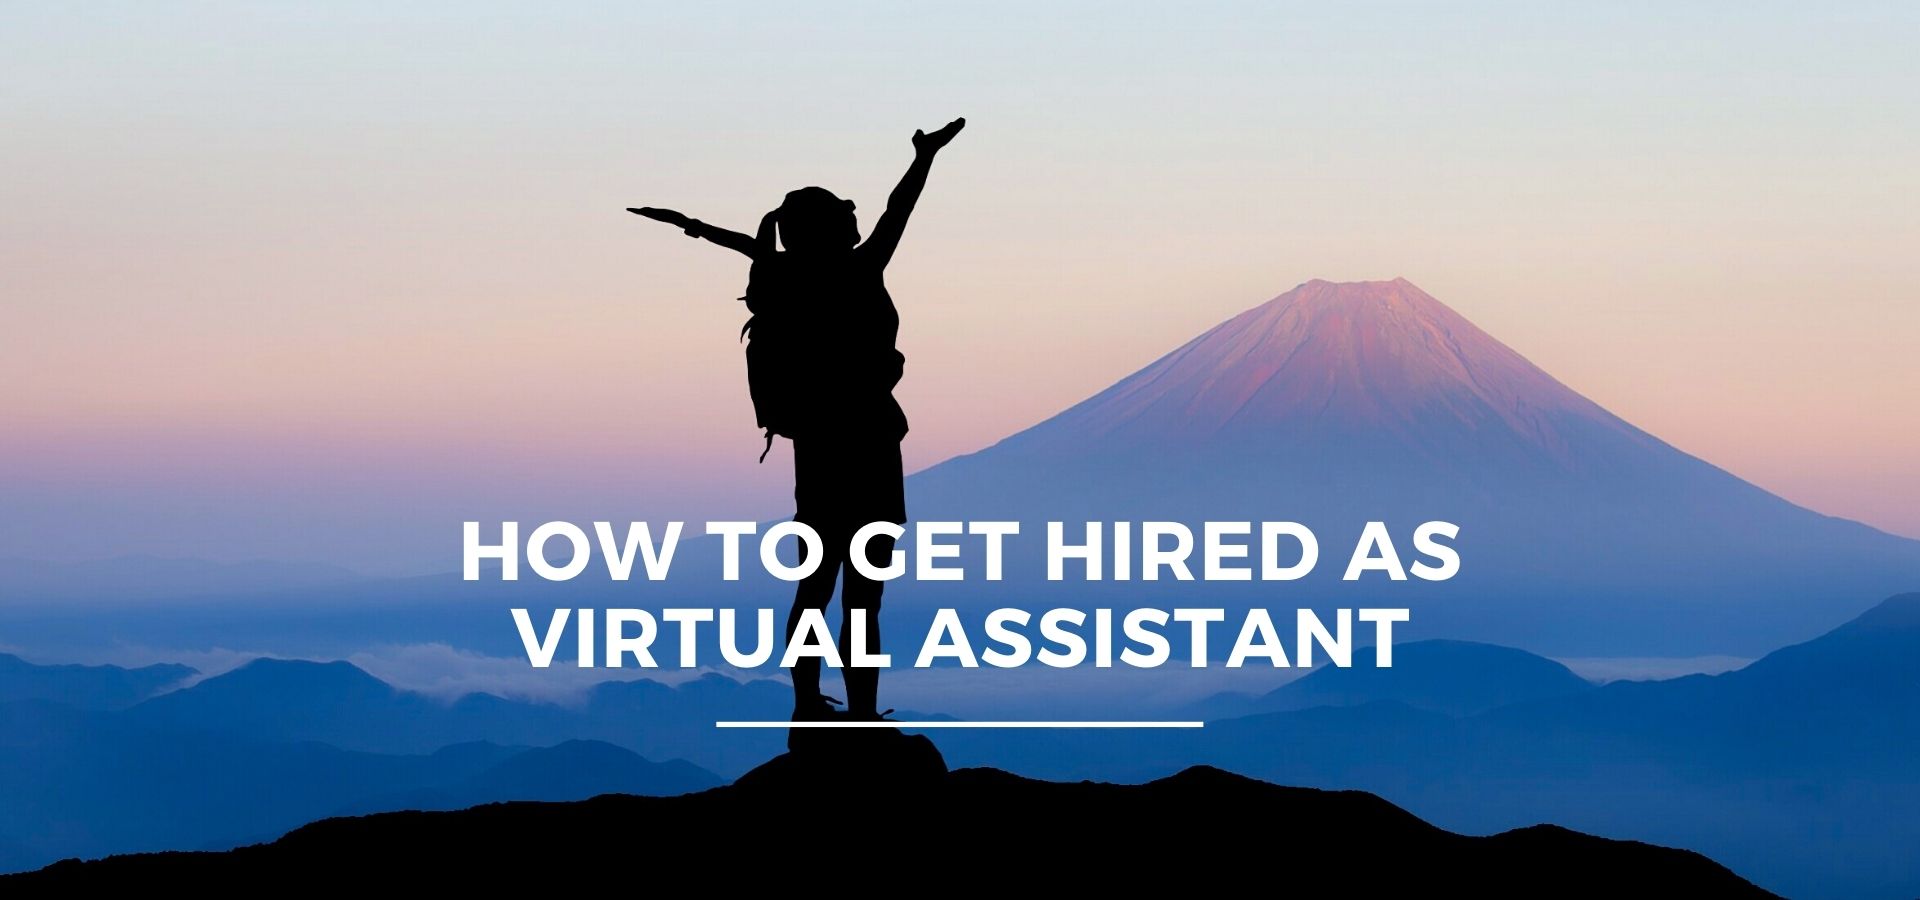 How to Get Hired as A Virtual Assistant